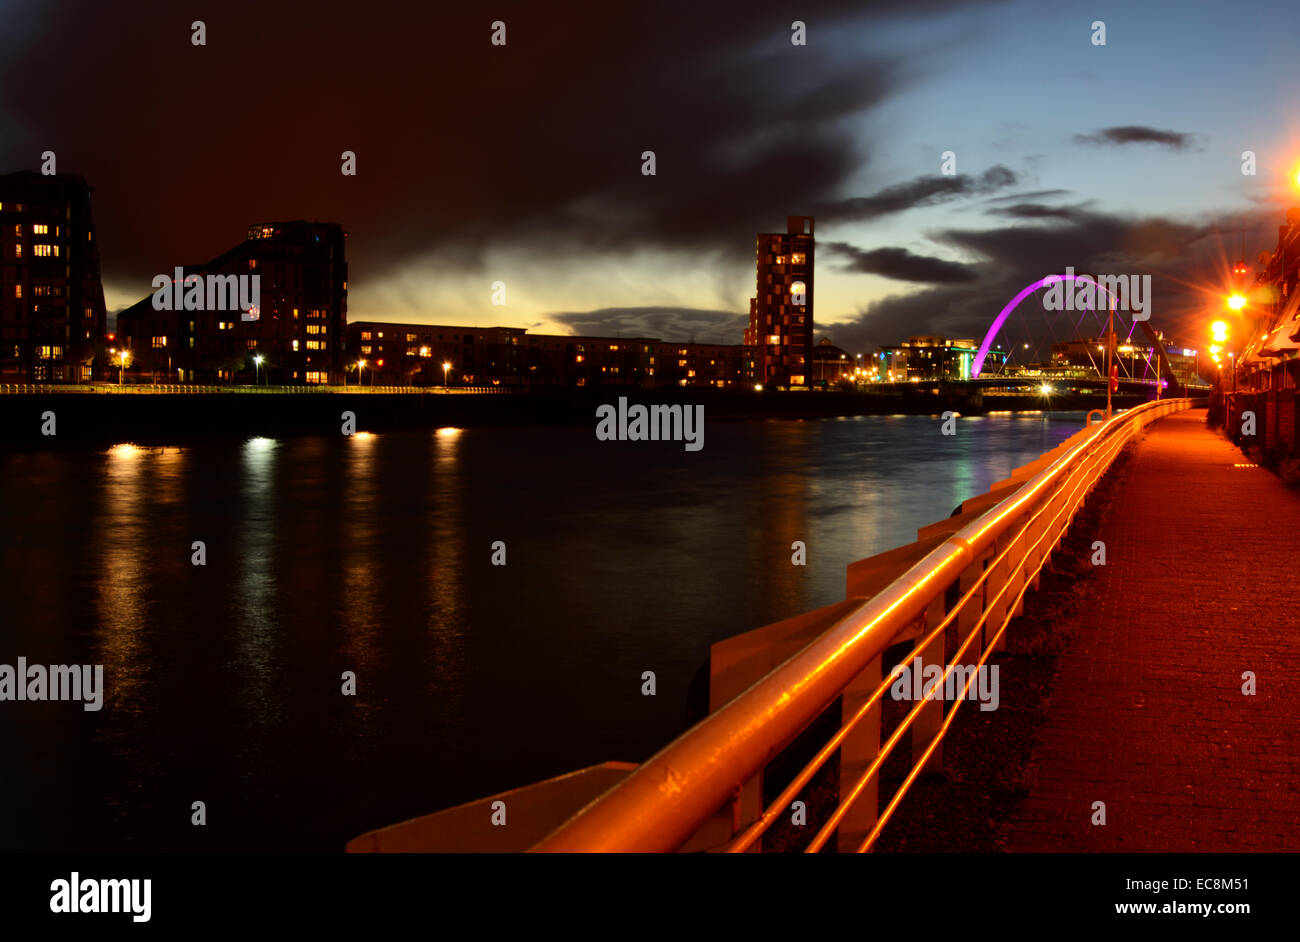 The River Clyde in Glasgow, Scotland at night Stock Photo